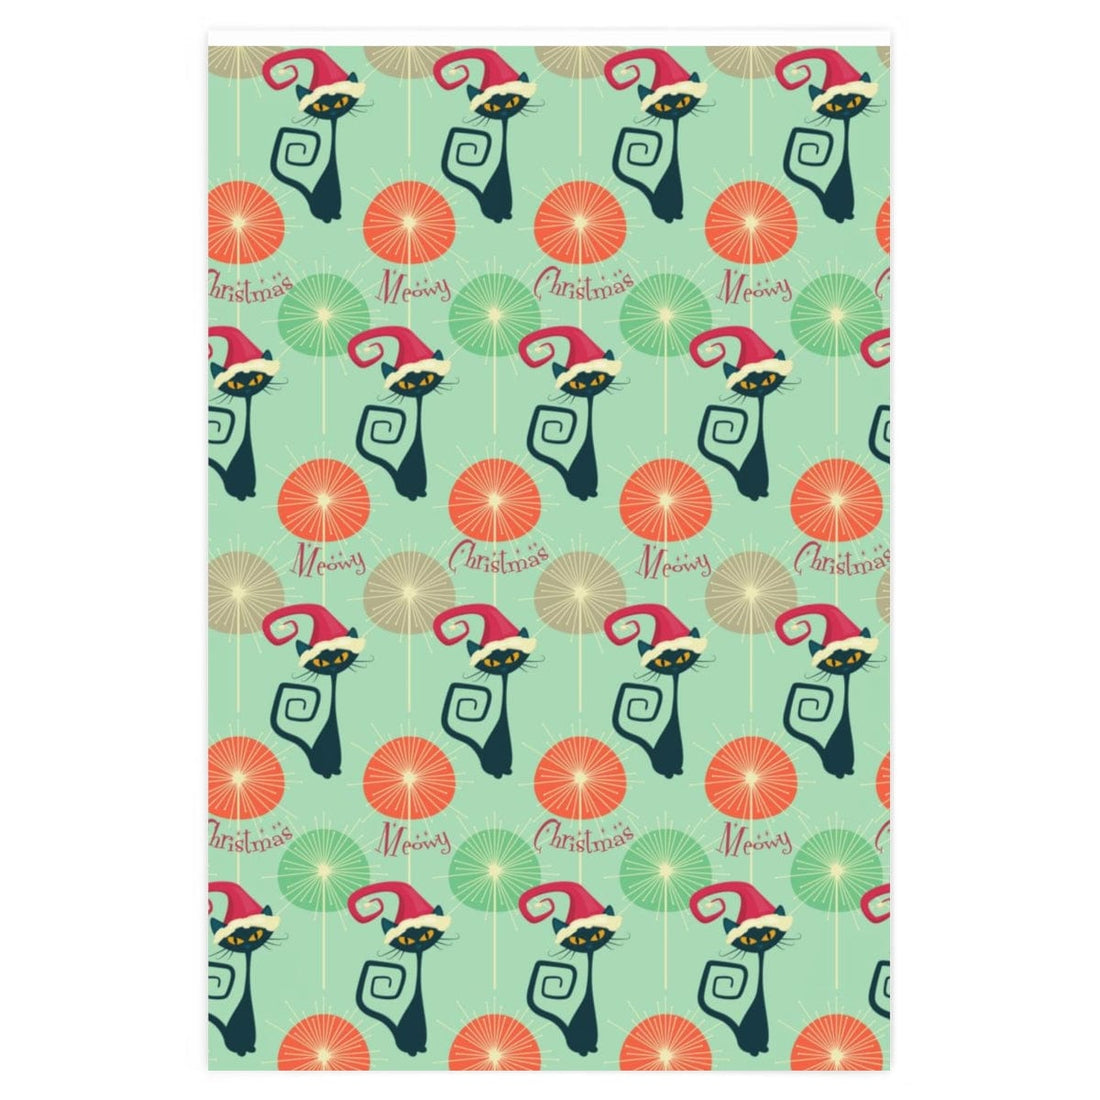 Kate McEnroe New York Atomic Cat Meowy Christmas Wrapping Paper Seasonal &amp; Holiday Decorations